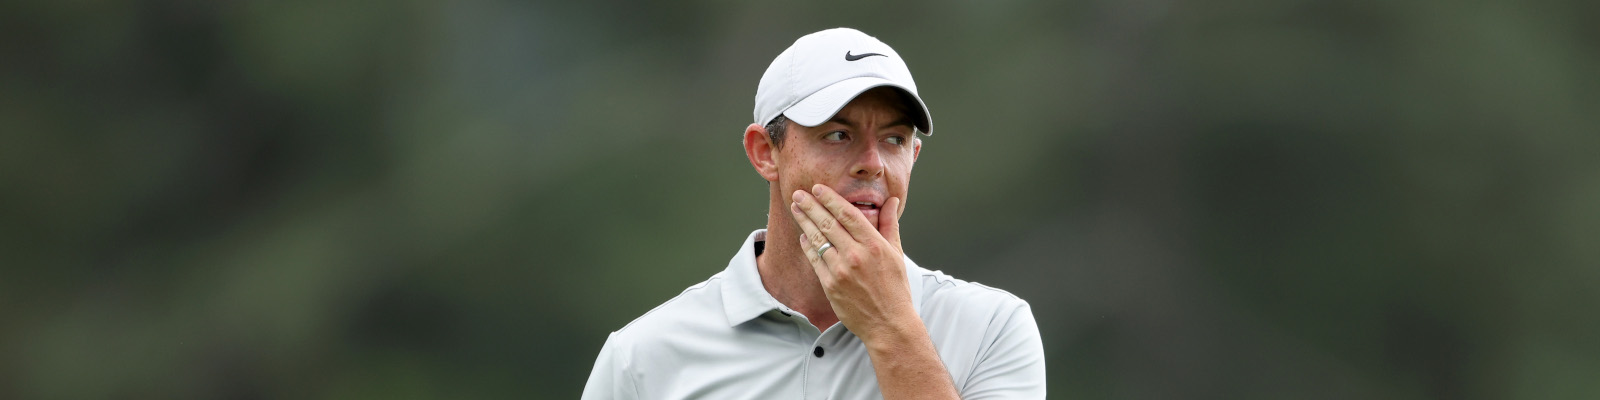 Rory McIlroy (Photo by Christian Petersen/Getty Images)